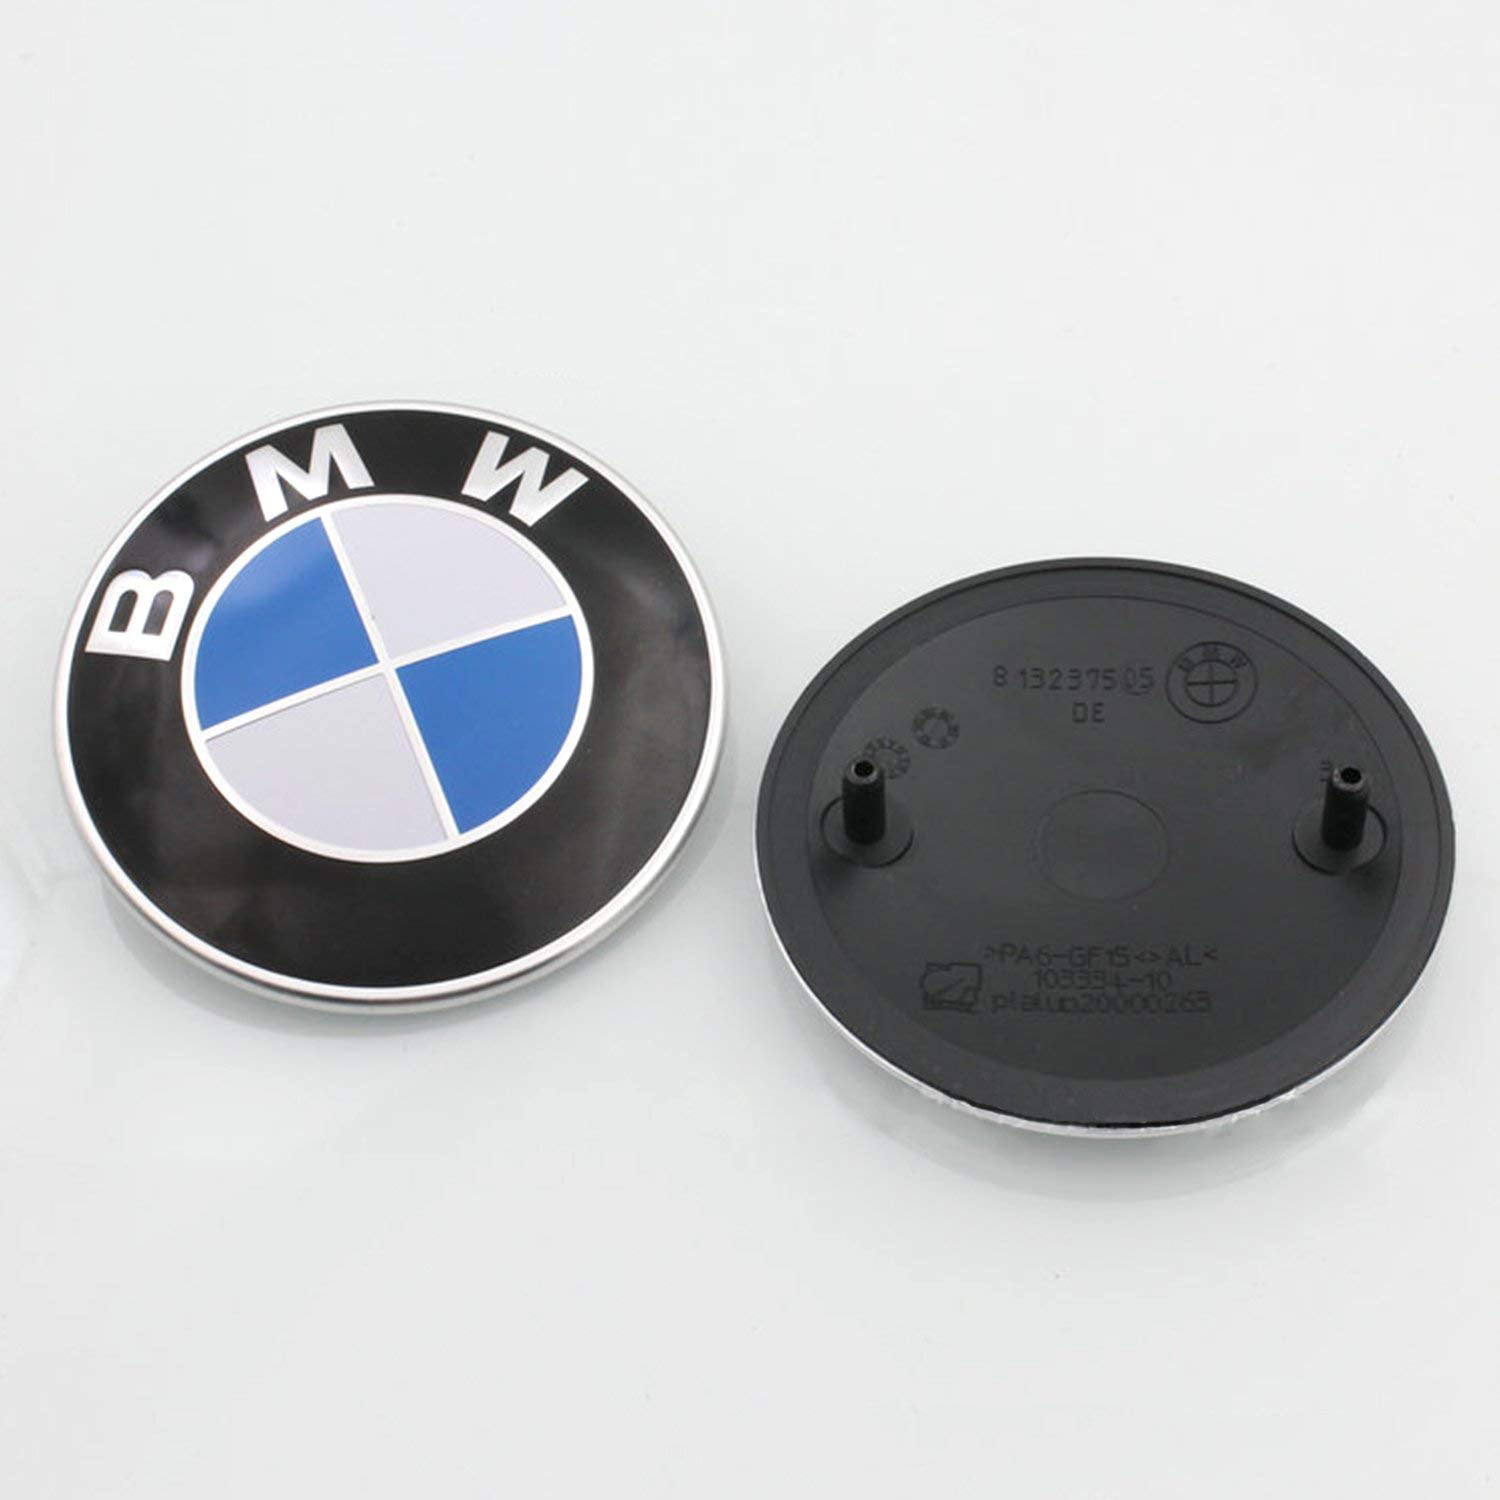 1pc 82mm BMW 2 pin Emblem Logo Replacement for Hood/Trunk for ALL Models BMW E30 E36 E46 E34 E39 E60 E65 E38 X3 X5 X6 3 4 5 6 7 8 Haocc Loud 